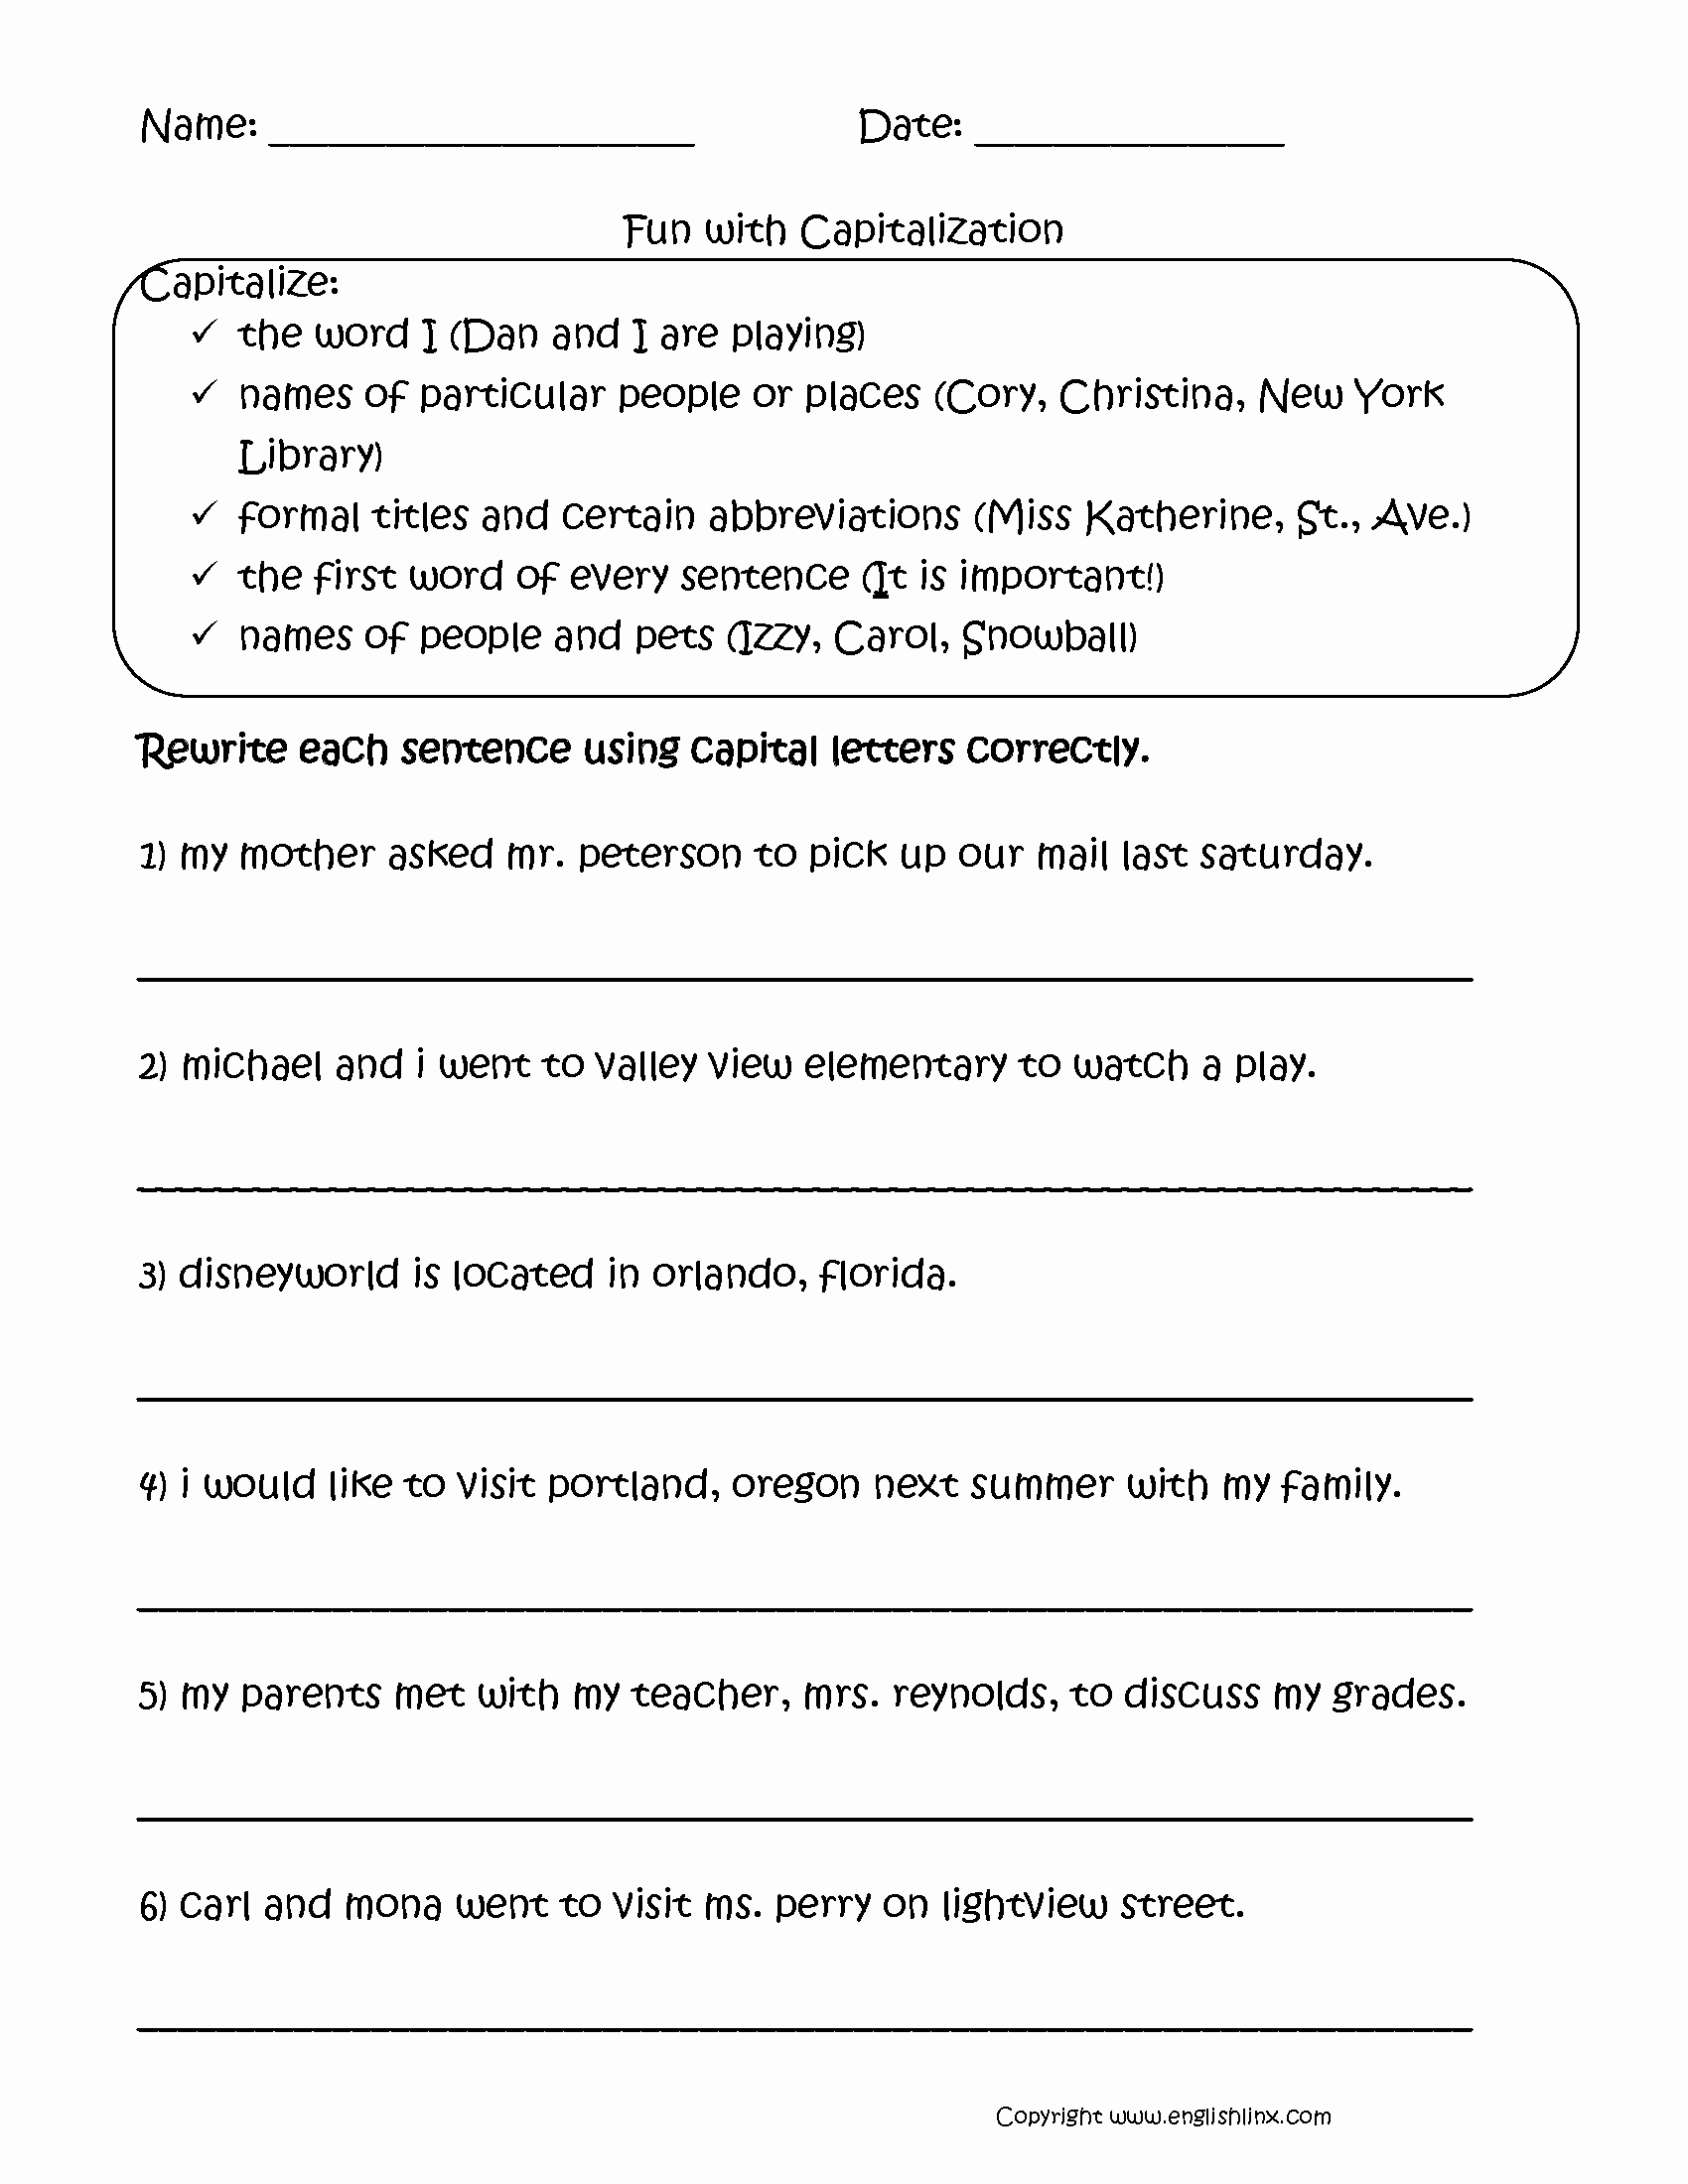 Capitalization Worksheets for 2nd Grade Luxury Fun with Capitalization Worksheets with Images